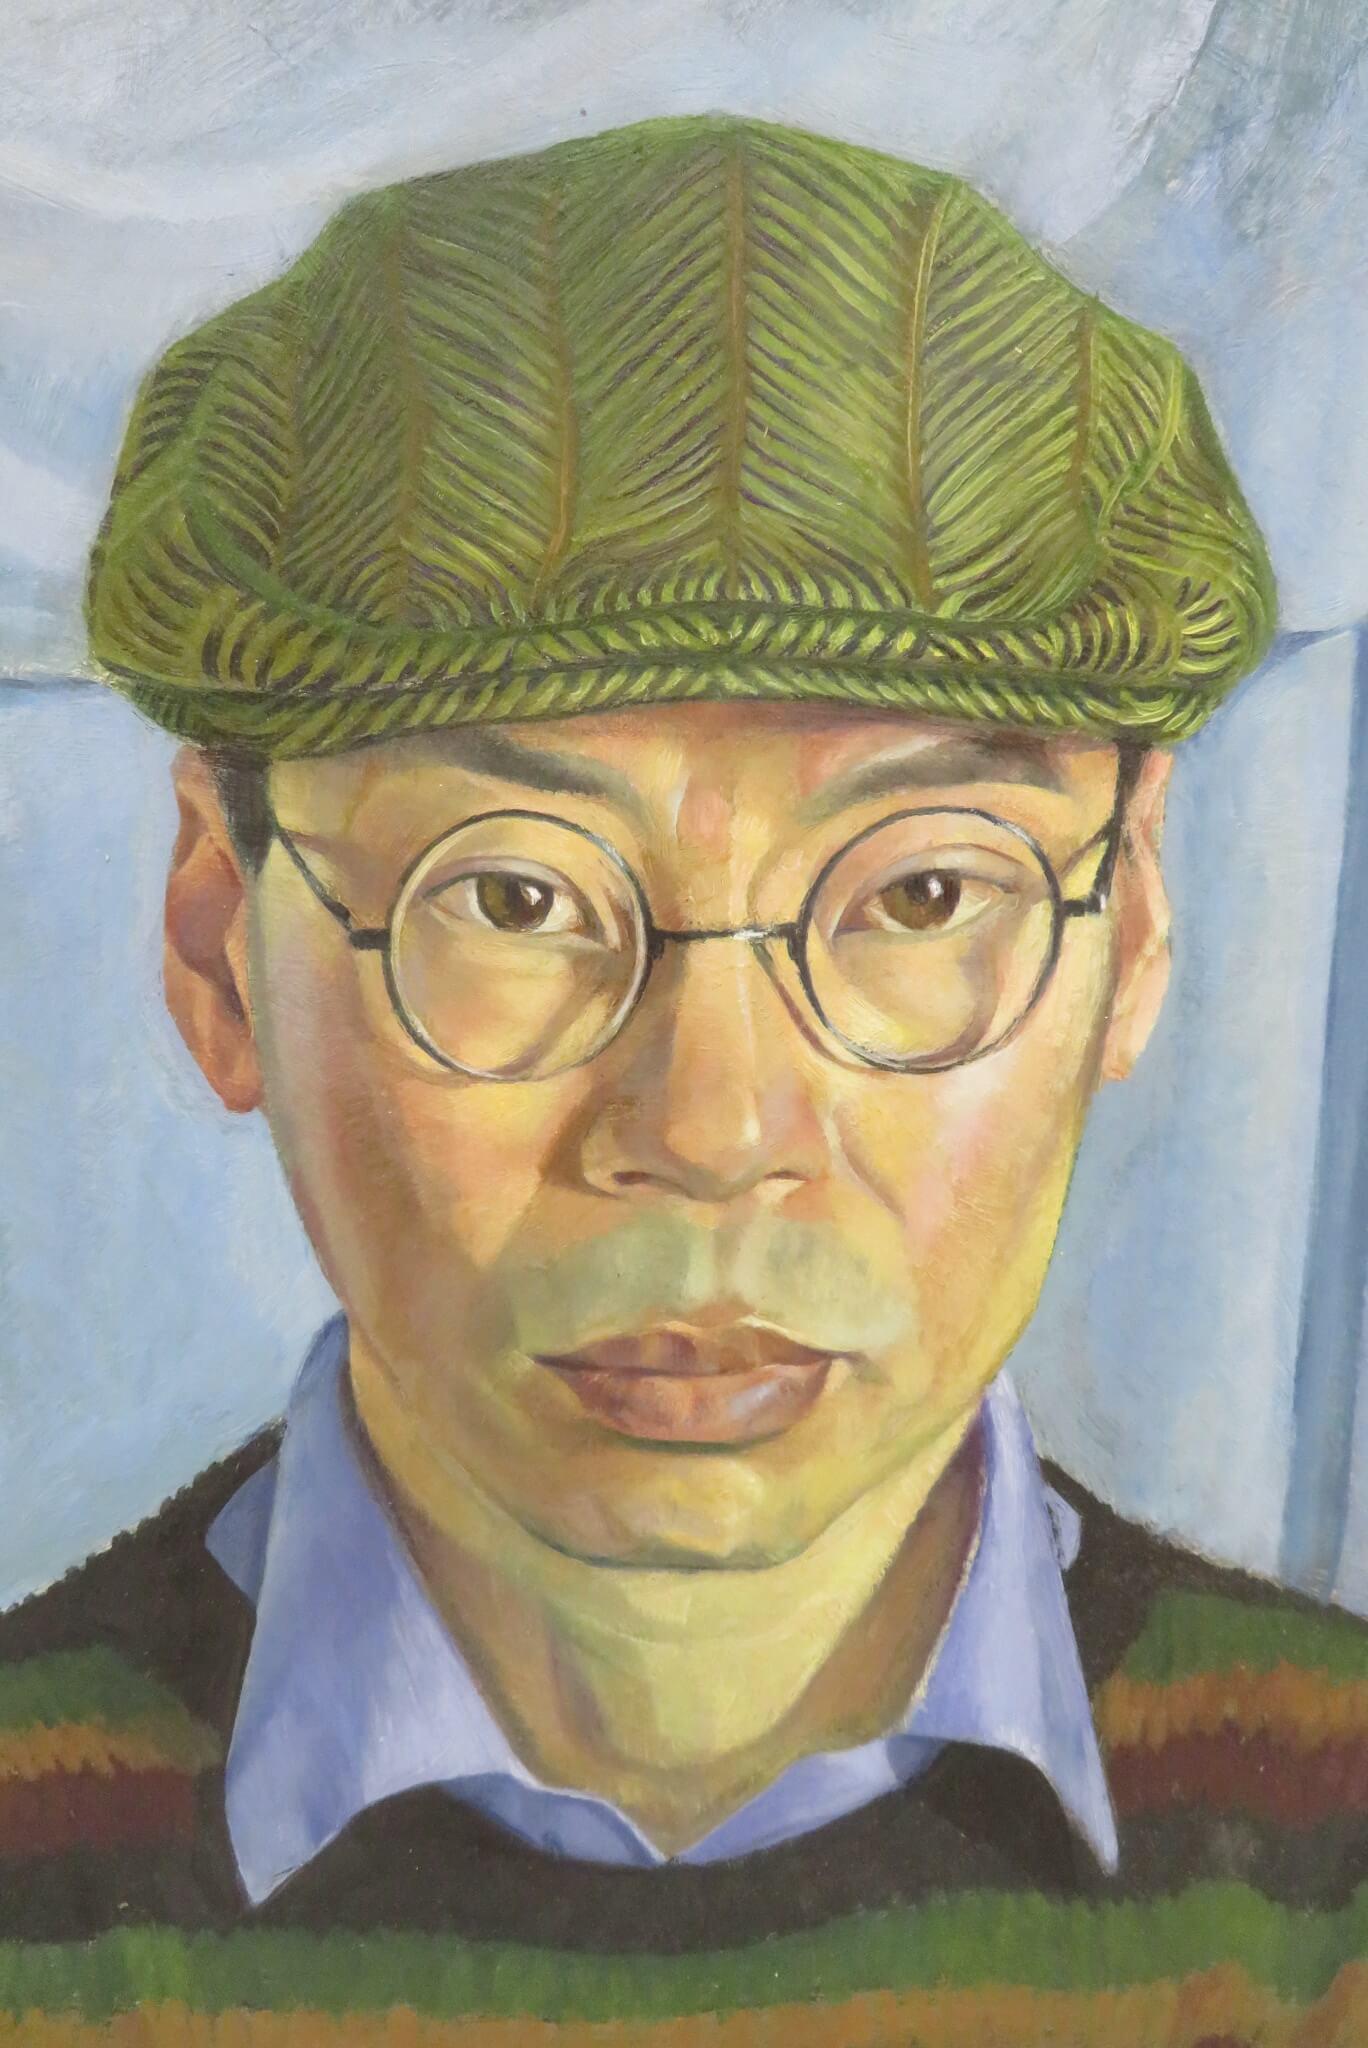 ARTIST: Toby Wiggins R.P. (1972-) British
TITLE: “Portrait Of Choi Keum Yui”
SIGNED: upper left
MEDIUM: oil on copper
SIZE: 41cm x 36cm inc frame
CONDITION: excellent
DETAIL: Toby Wiggins studied at the Royal Academy Schools. He has exhibited at the